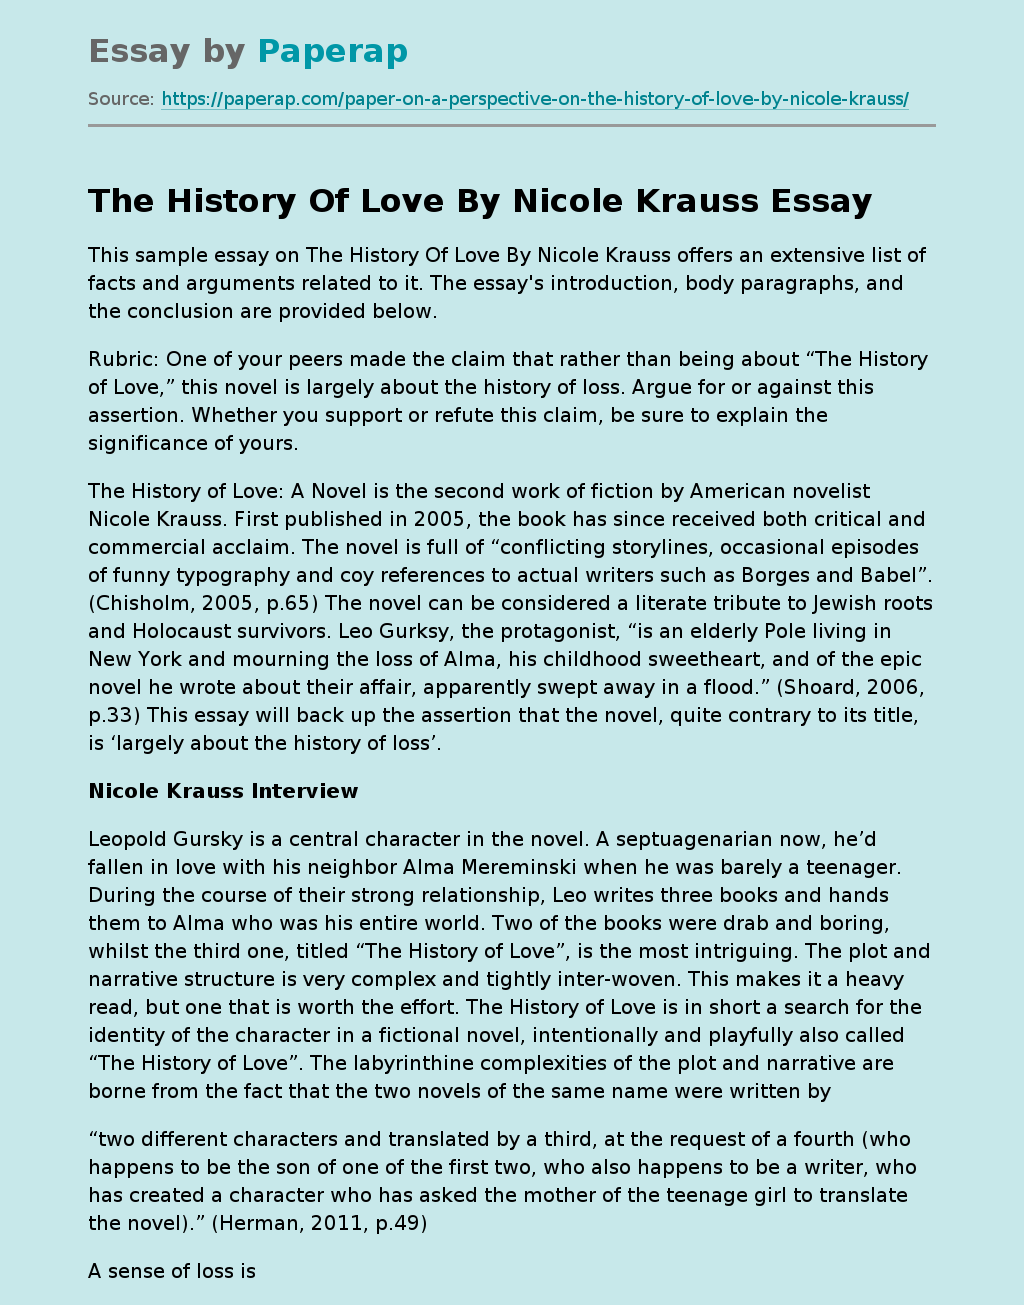 The History Of Love By Nicole Krauss